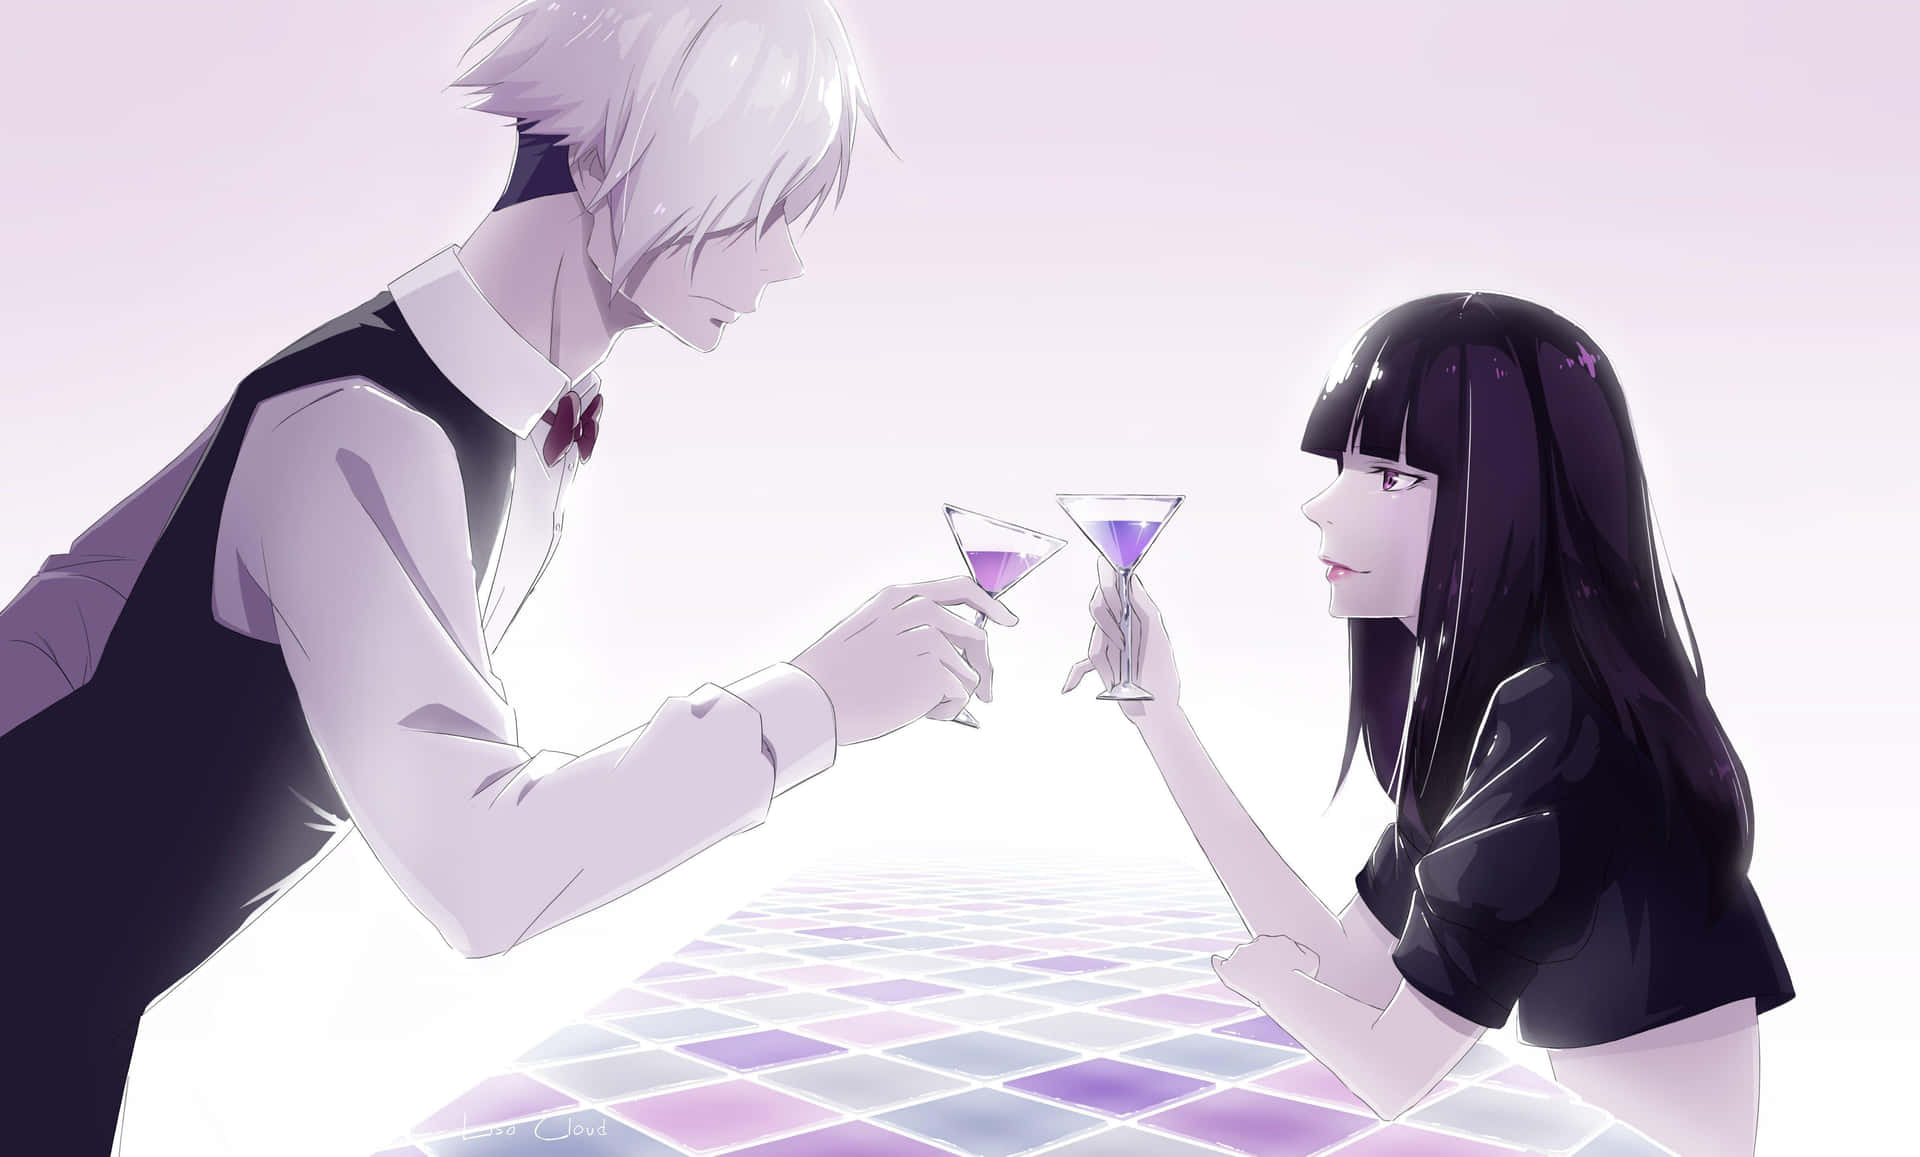 Death Parade - Every Decison has Meaning